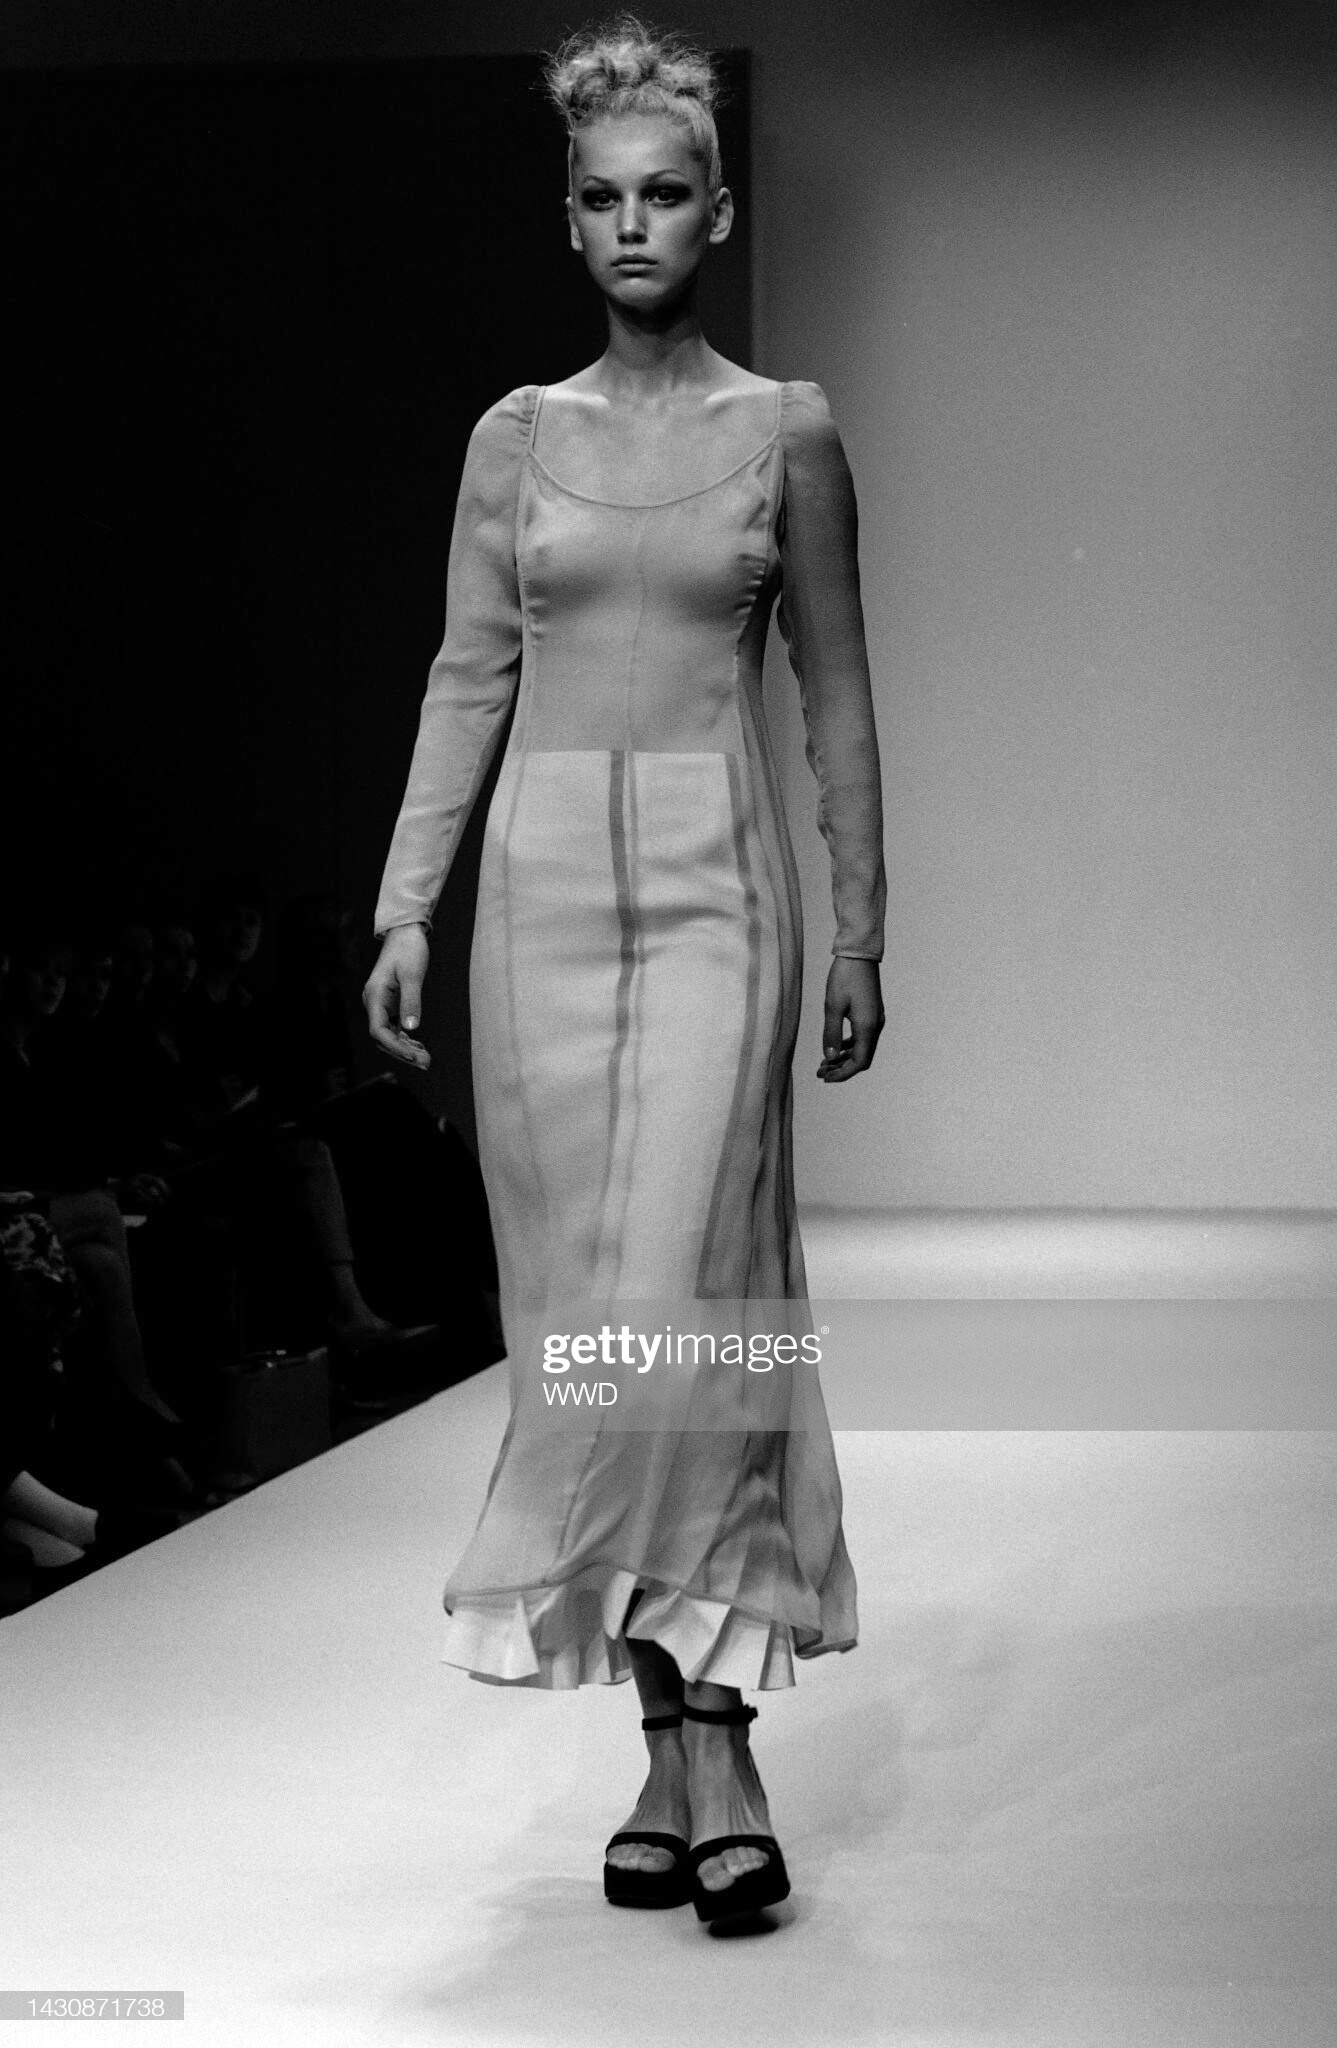 A model walks in the Louis Feraud Spring 1999 Couture Runway Show